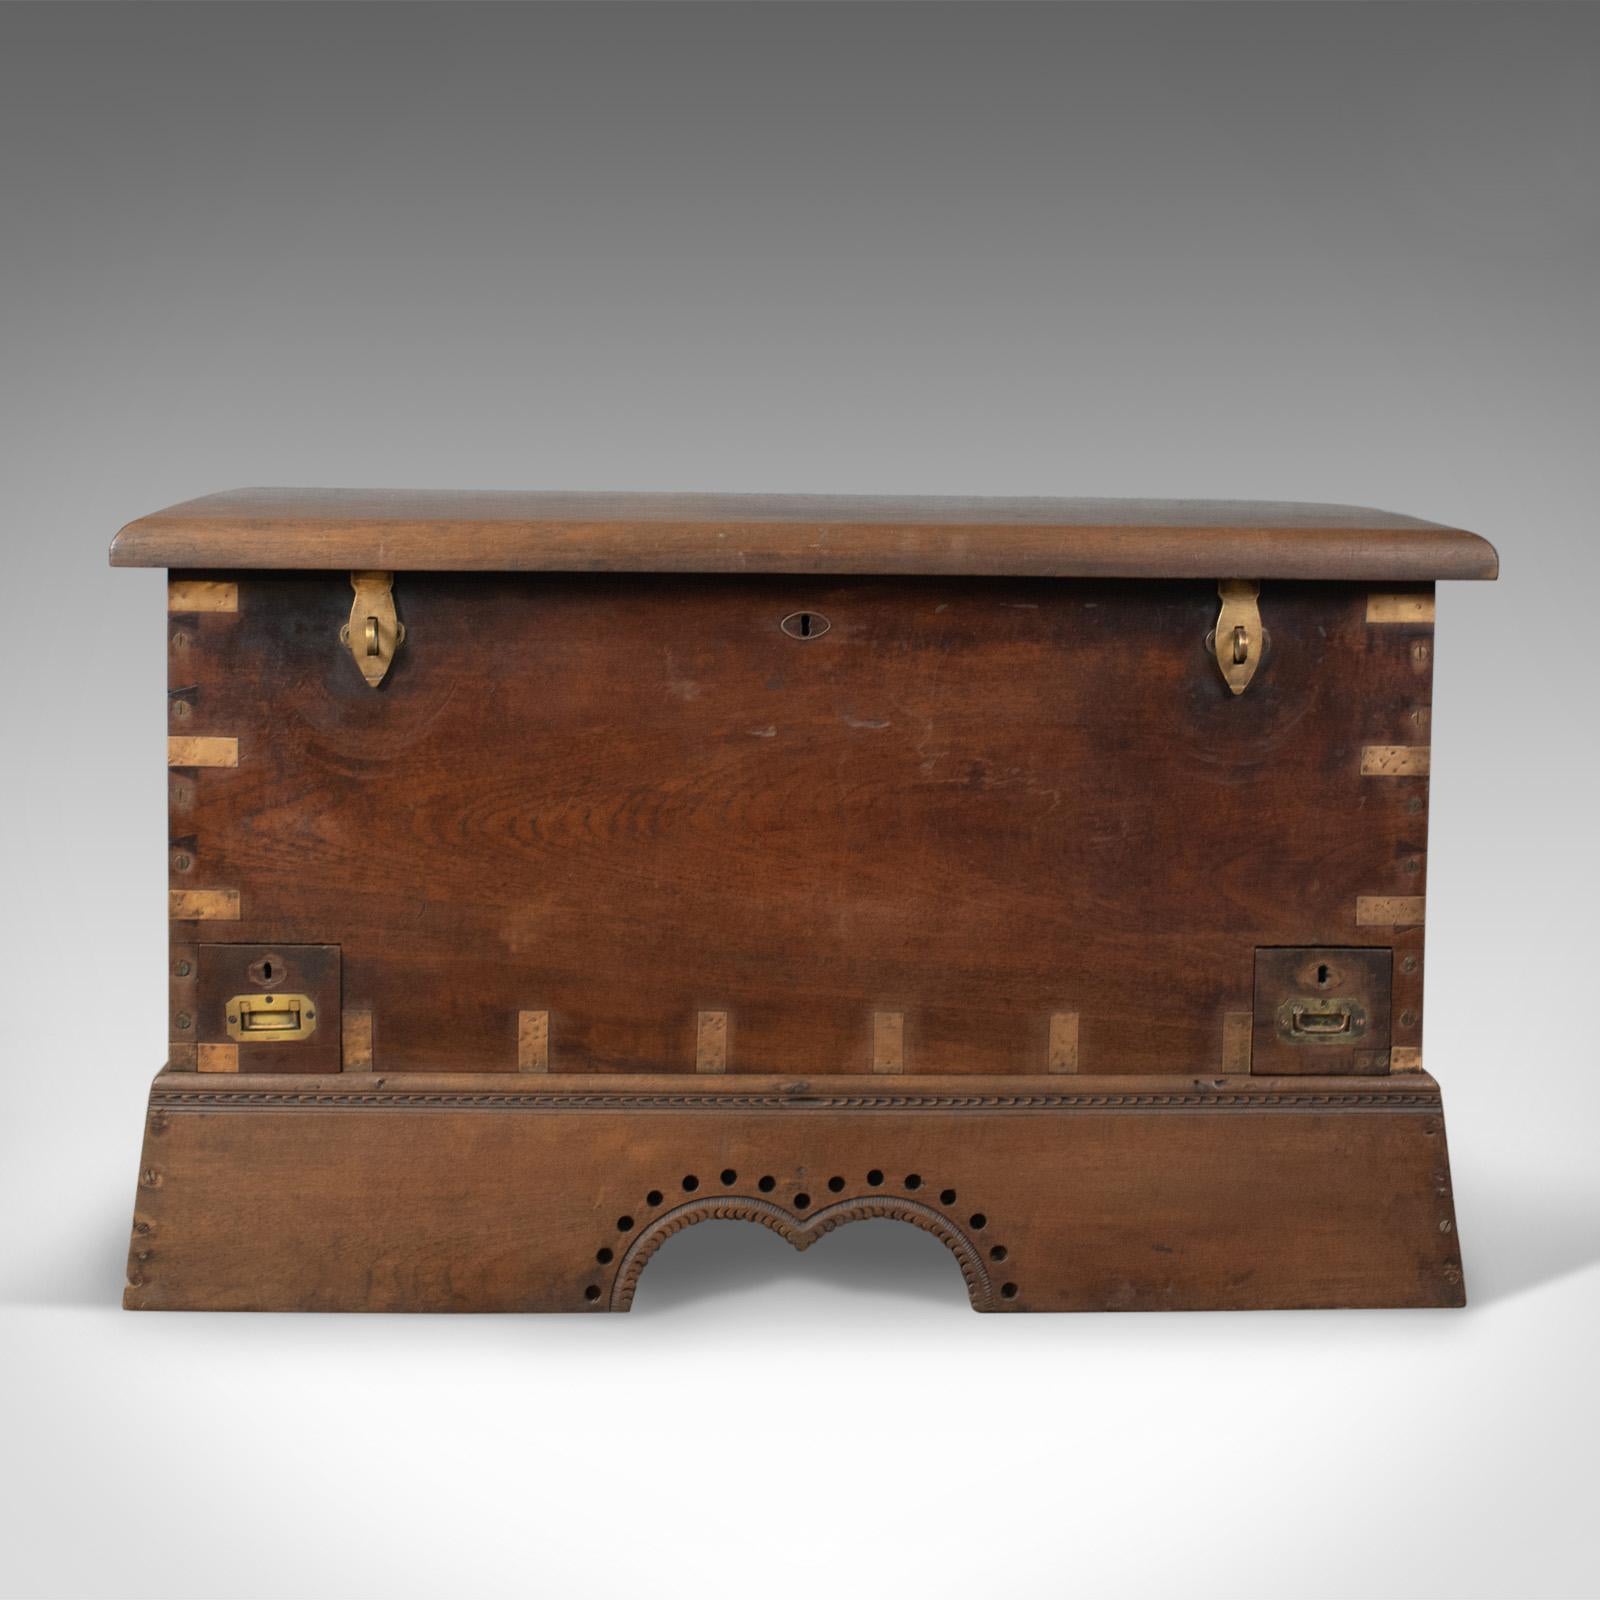 This is an antique dowry chest, a Burmese, teak trunk dating to the late 19th century, circa 1890.

Attractive Burmese dowry chest
Stout teak construction displaying good colour
Grain interest throughout with a desirable aged patina.

Brass